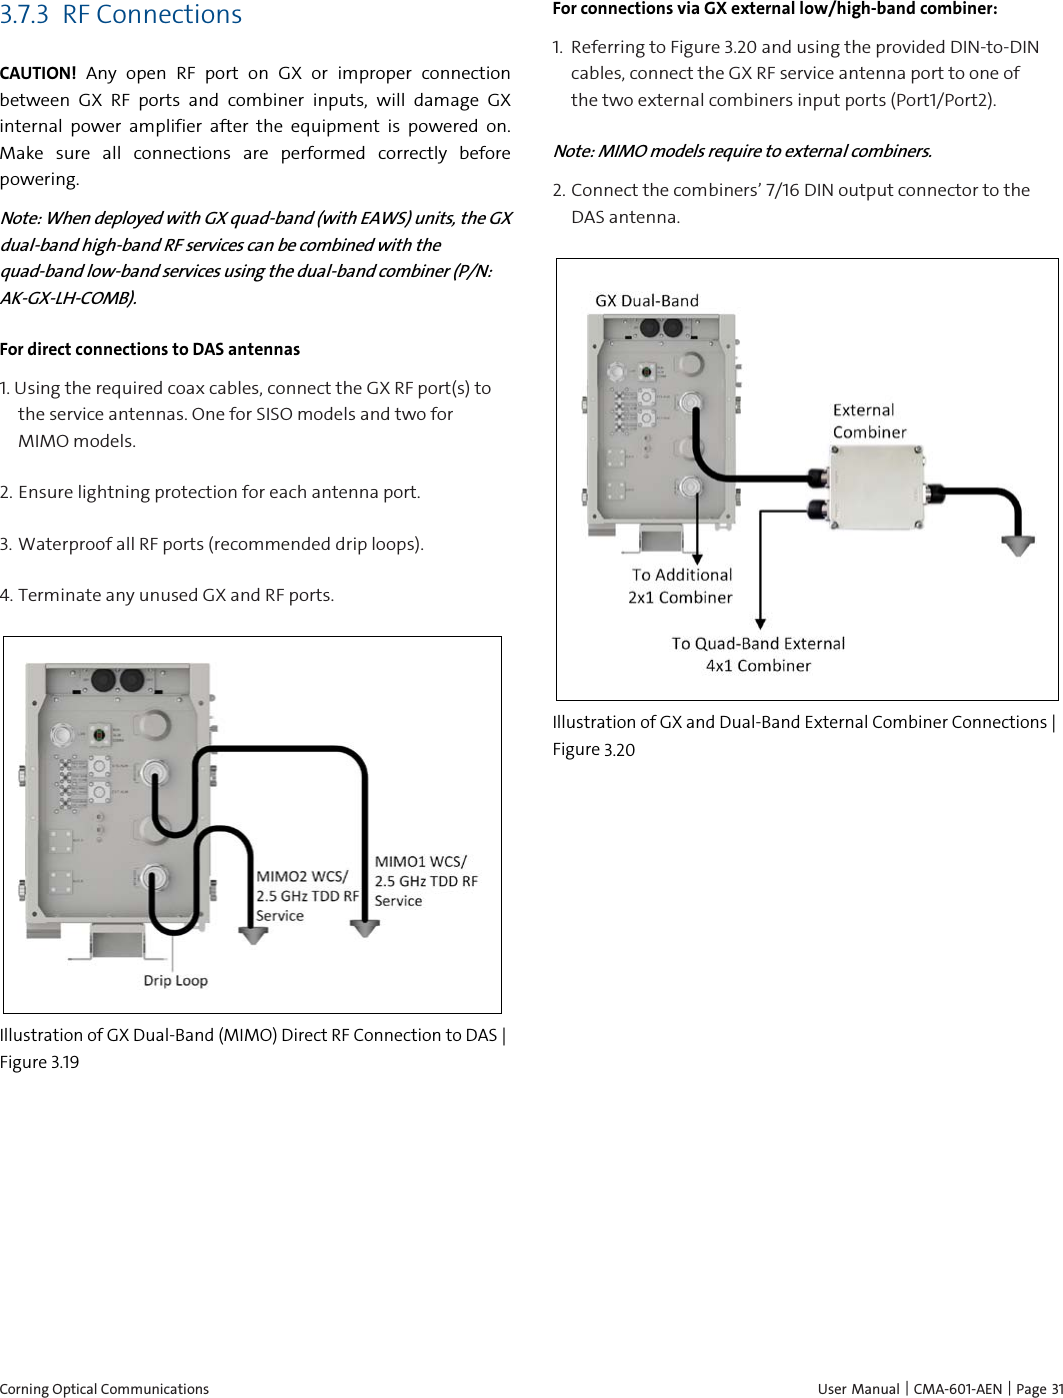  Corning Optical Communications    User Manual | CMA-601-AEN | Page  31 3.7.3 RF Connections CAUTION! Any open RF port on GX or improper connection between GX RF ports and combiner inputs, will damage GX internal power amplifier after the equipment is powered on. Make sure all connections are performed correctly before powering. Note: When deployed with GX quad-band (with EAWS) units, the GX dual-band high-band RF services can be combined with the quad-band low-band services using the dual-band combiner (P/N: AK-GX-LH-COMB).  For direct connections to DAS antennas 1. Using the required coax cables, connect the GX RF port(s) to the service antennas. One for SISO models and two for MIMO models. 2.  Ensure lightning protection for each antenna port. 3.  Waterproof all RF ports (recommended drip loops). 4.  Terminate any unused GX and RF ports.  Illustration of GX Dual-Band (MIMO) Direct RF Connection to DAS | Figure  3.19 For connections via GX external low/high-band combiner: 1.  Referring to Figure 3.20 and using the provided DIN-to-DIN cables, connect the GX RF service antenna port to one of the two external combiners input ports (Port1/Port2).  Note: MIMO models require to external combiners. 2. Connect the combiners’ 7/16 DIN output connector to the DAS antenna.  Illustration of GX and Dual-Band External Combiner Connections | Figure  3.20 